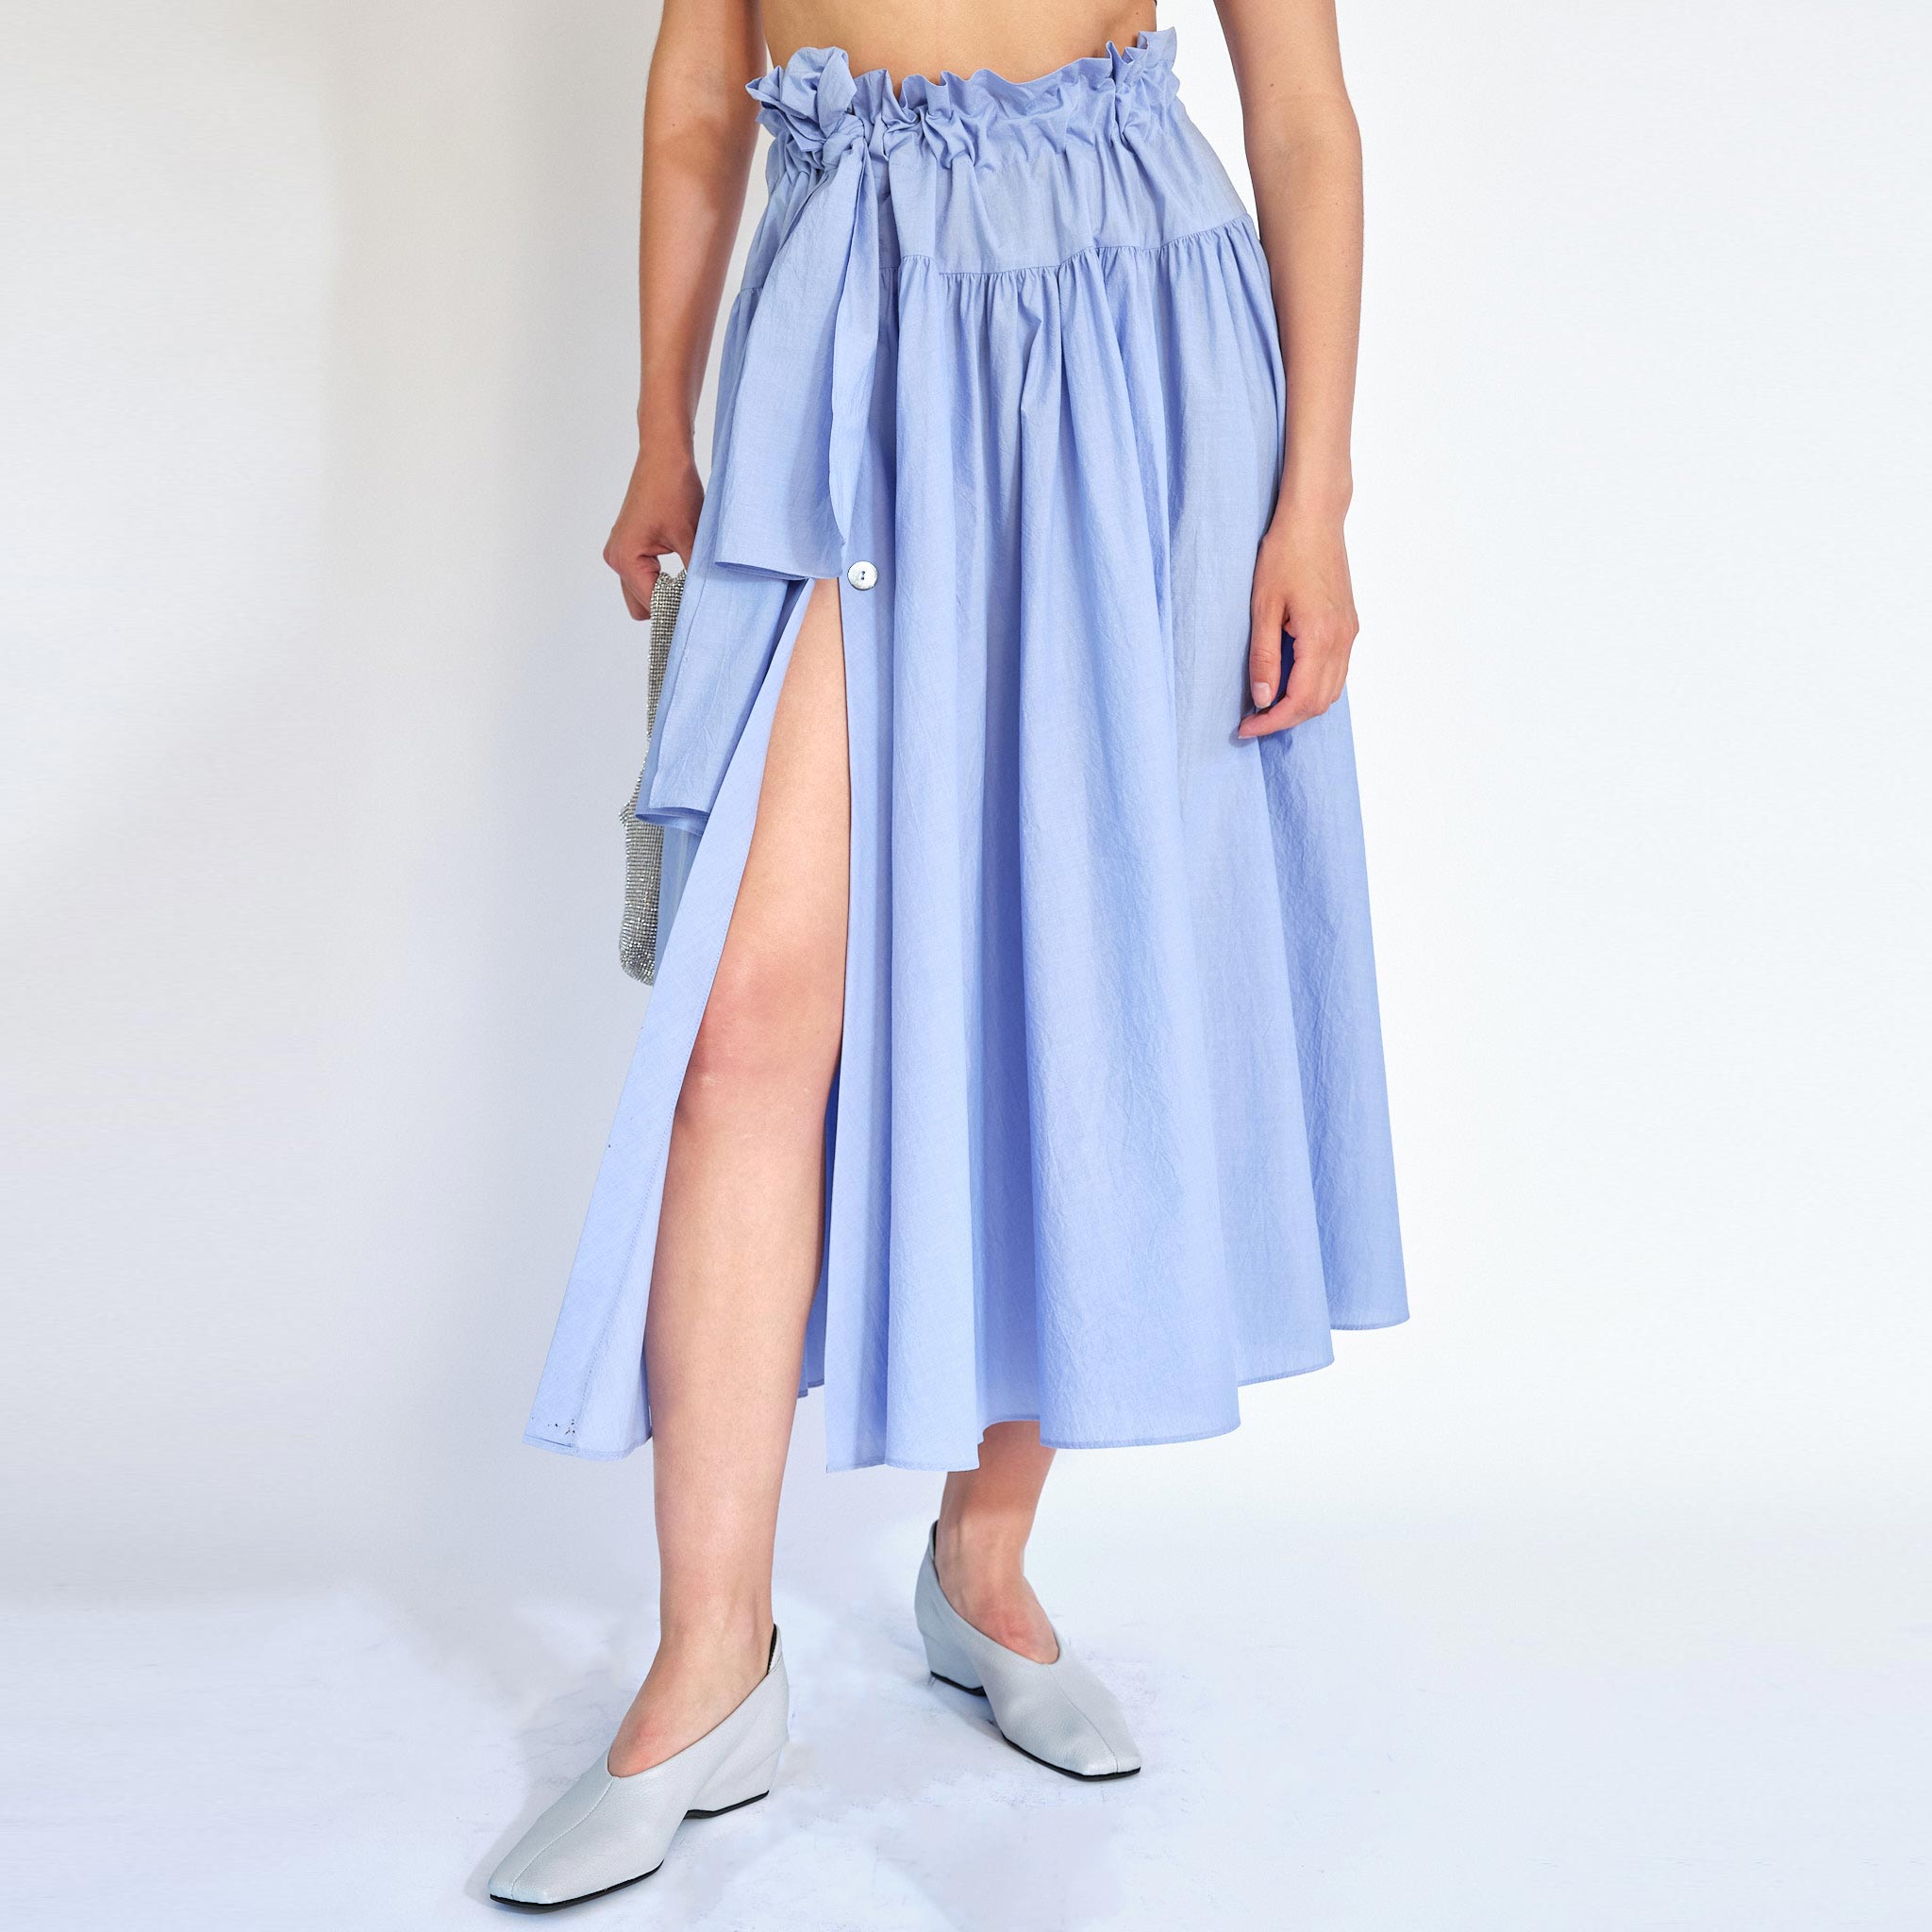 A model wears the Carlita Skirt, with a ruched, paperbag style waist and built in tie, with a side slit opening - front view.